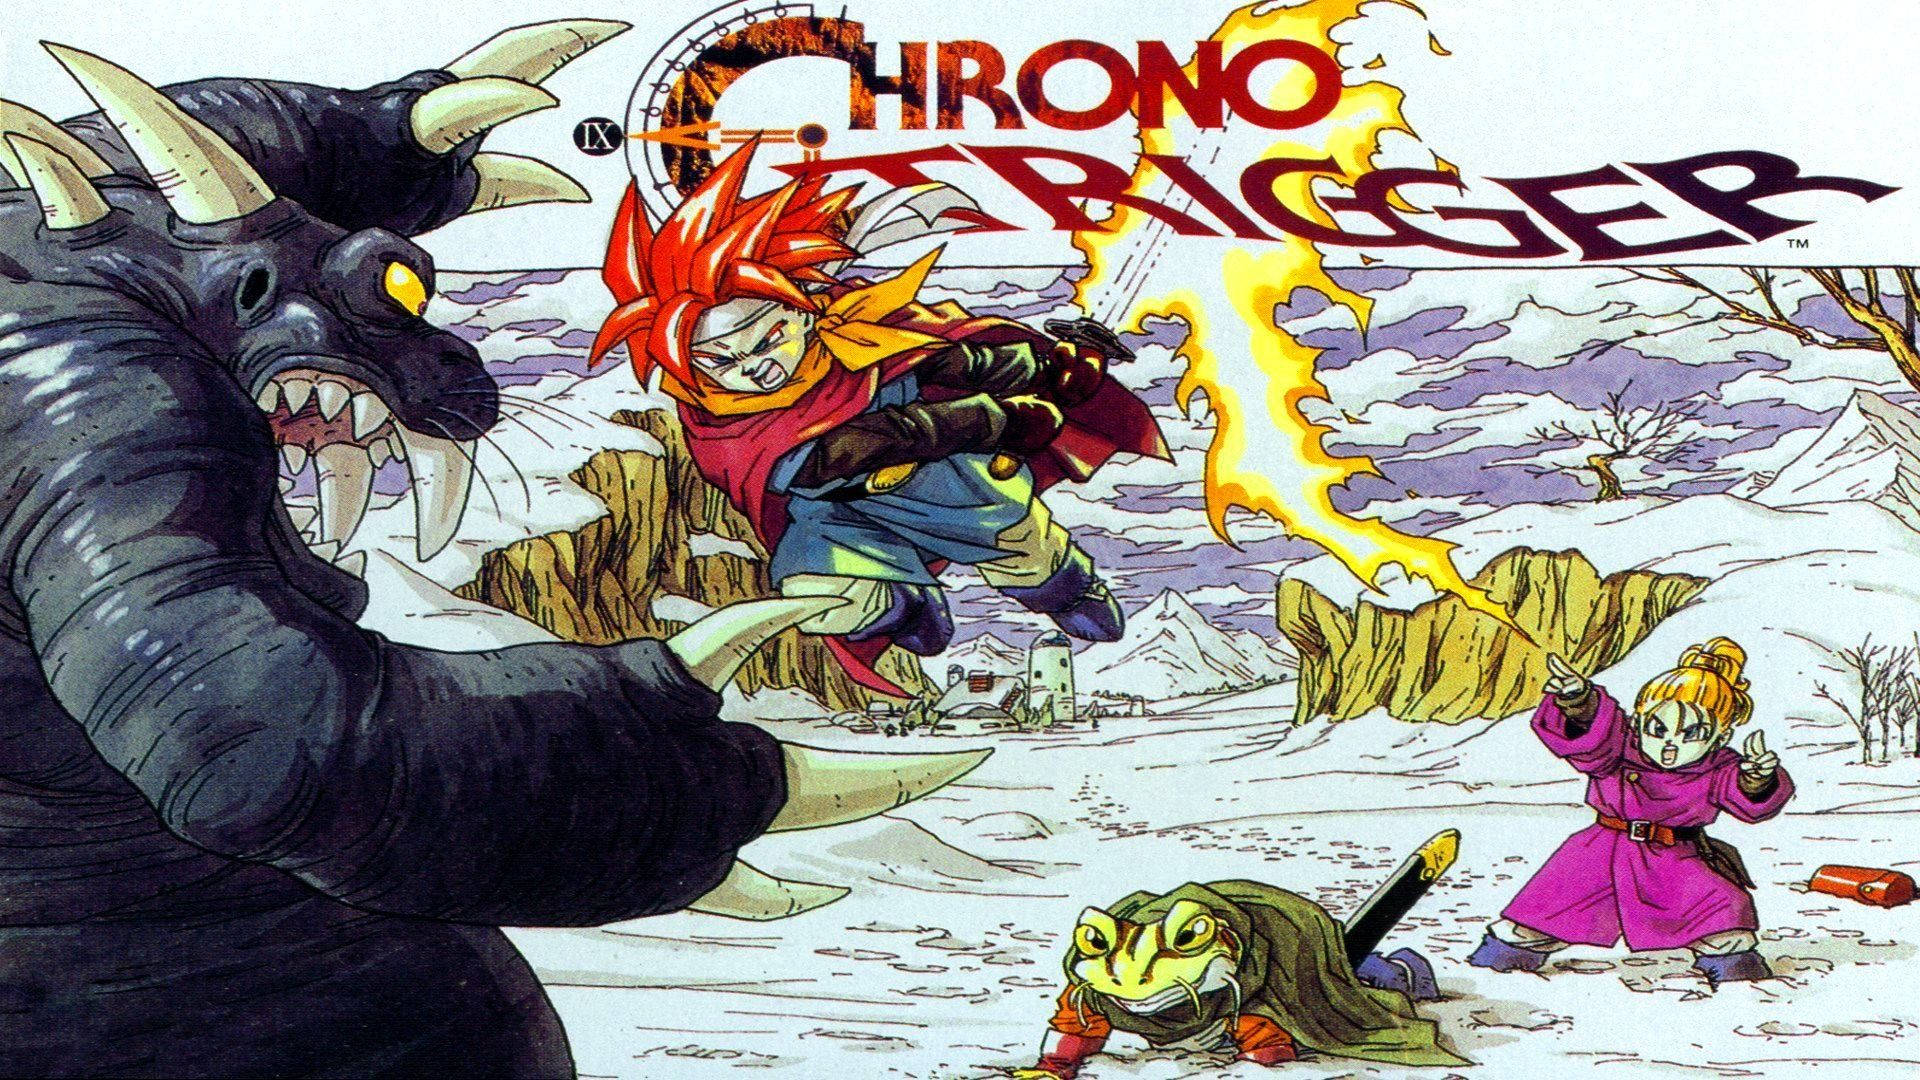 Chrono Trigger 1995 Game Comic Cover Background